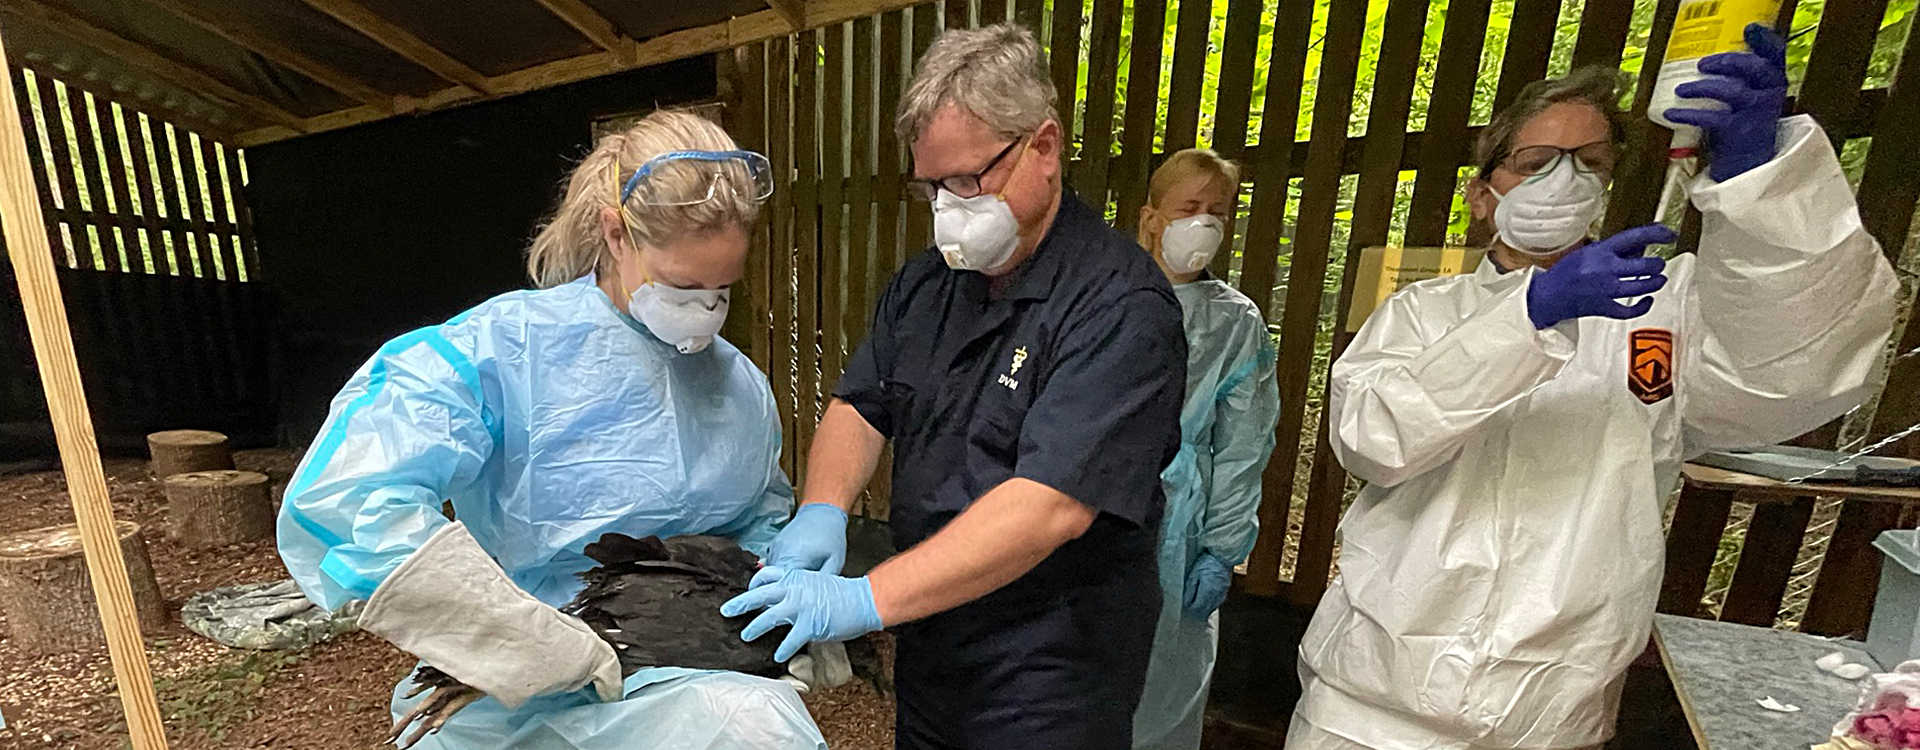 Carolina Raptor Center Director of Avian Operations Kristin Dean holds a Black Vulture for North Carolina Department of Agriculture State Veterinarian Dr. Mike Martin while US Fish and Wildlife Service Wildlife Veterinarian Dr. Samantha Gibbs prepares the vaccine.